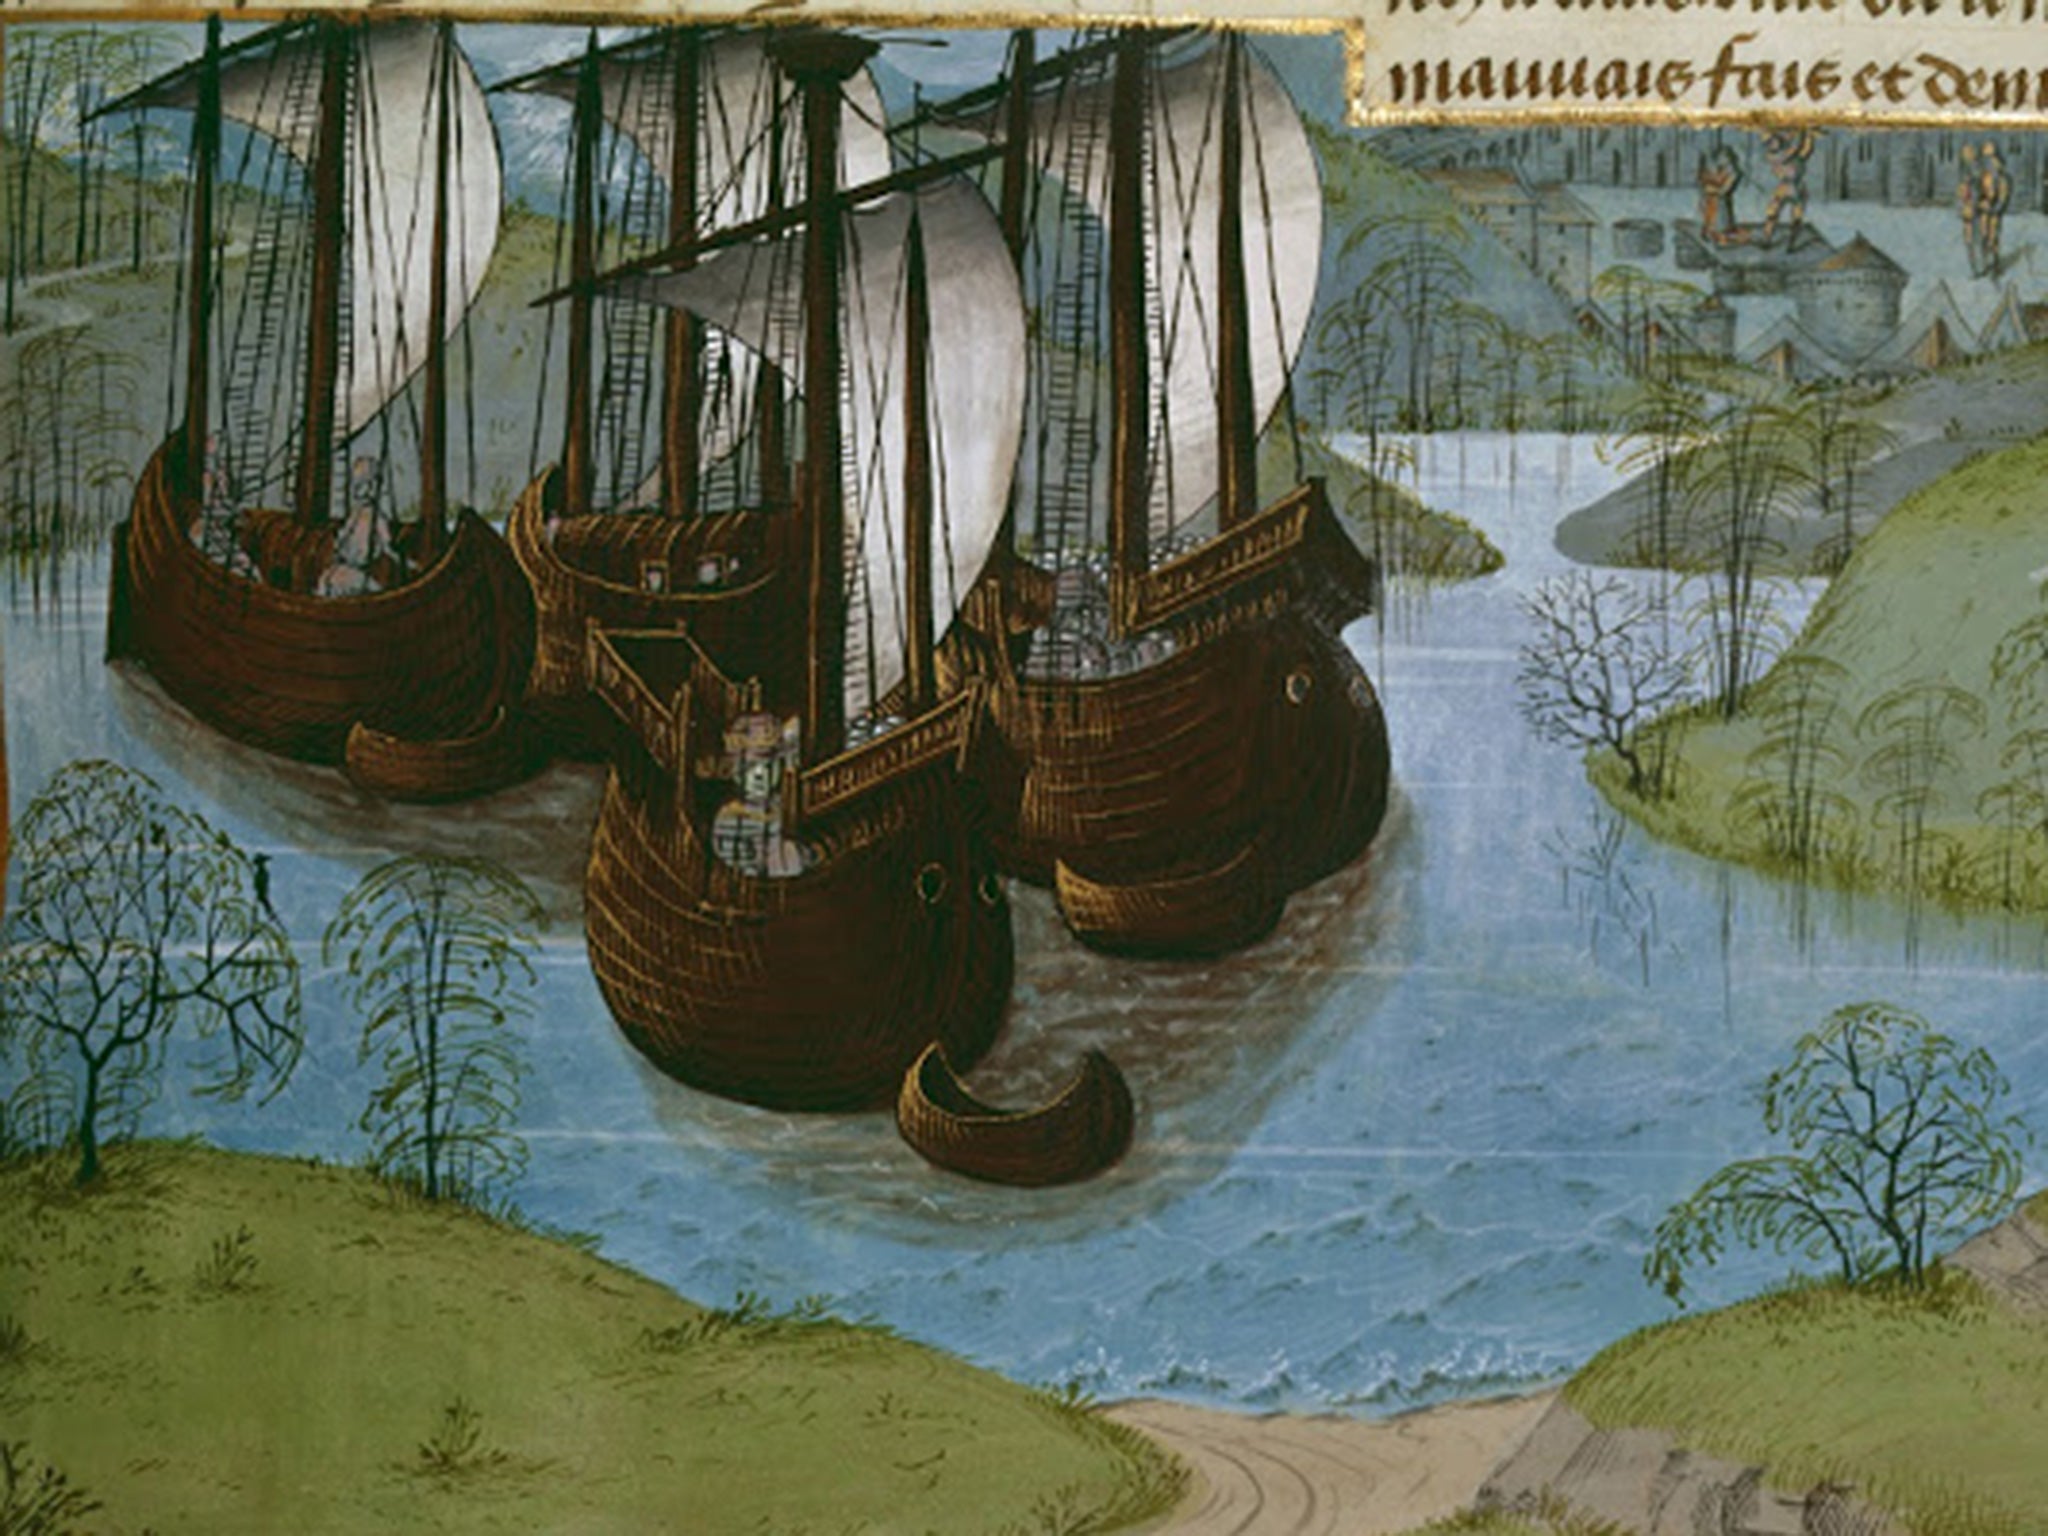 Depiction of the royal fleet of King Edward I of England. From Jean de Wavrin's 'Chronicles of England', Bruges, c.1470-80